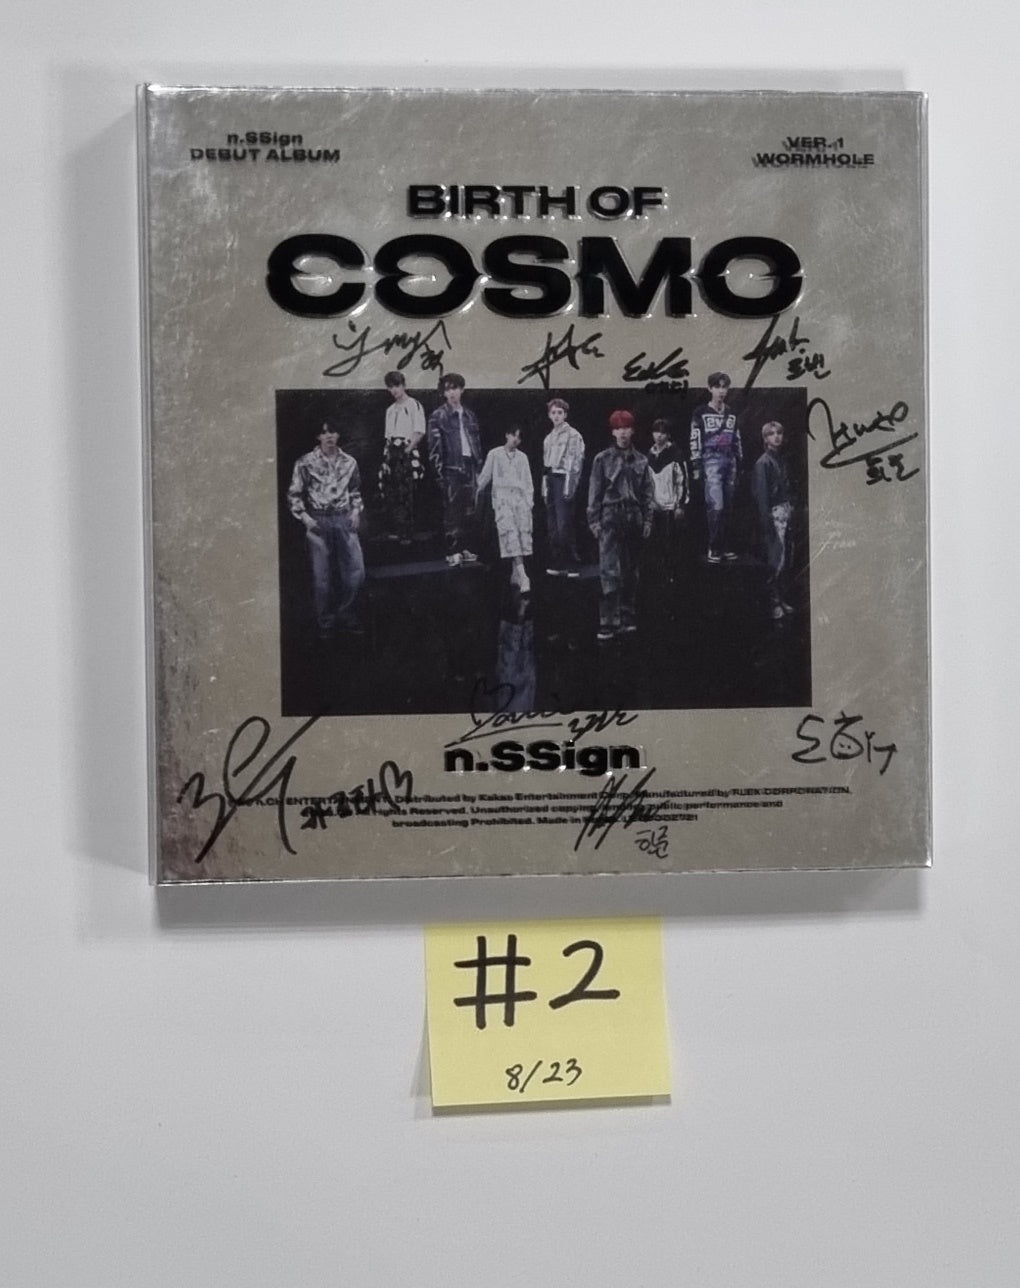 n.SSign "BIRTH OF COSMO" - Hand Autographed(Signed) Promo Album [23.08.23]